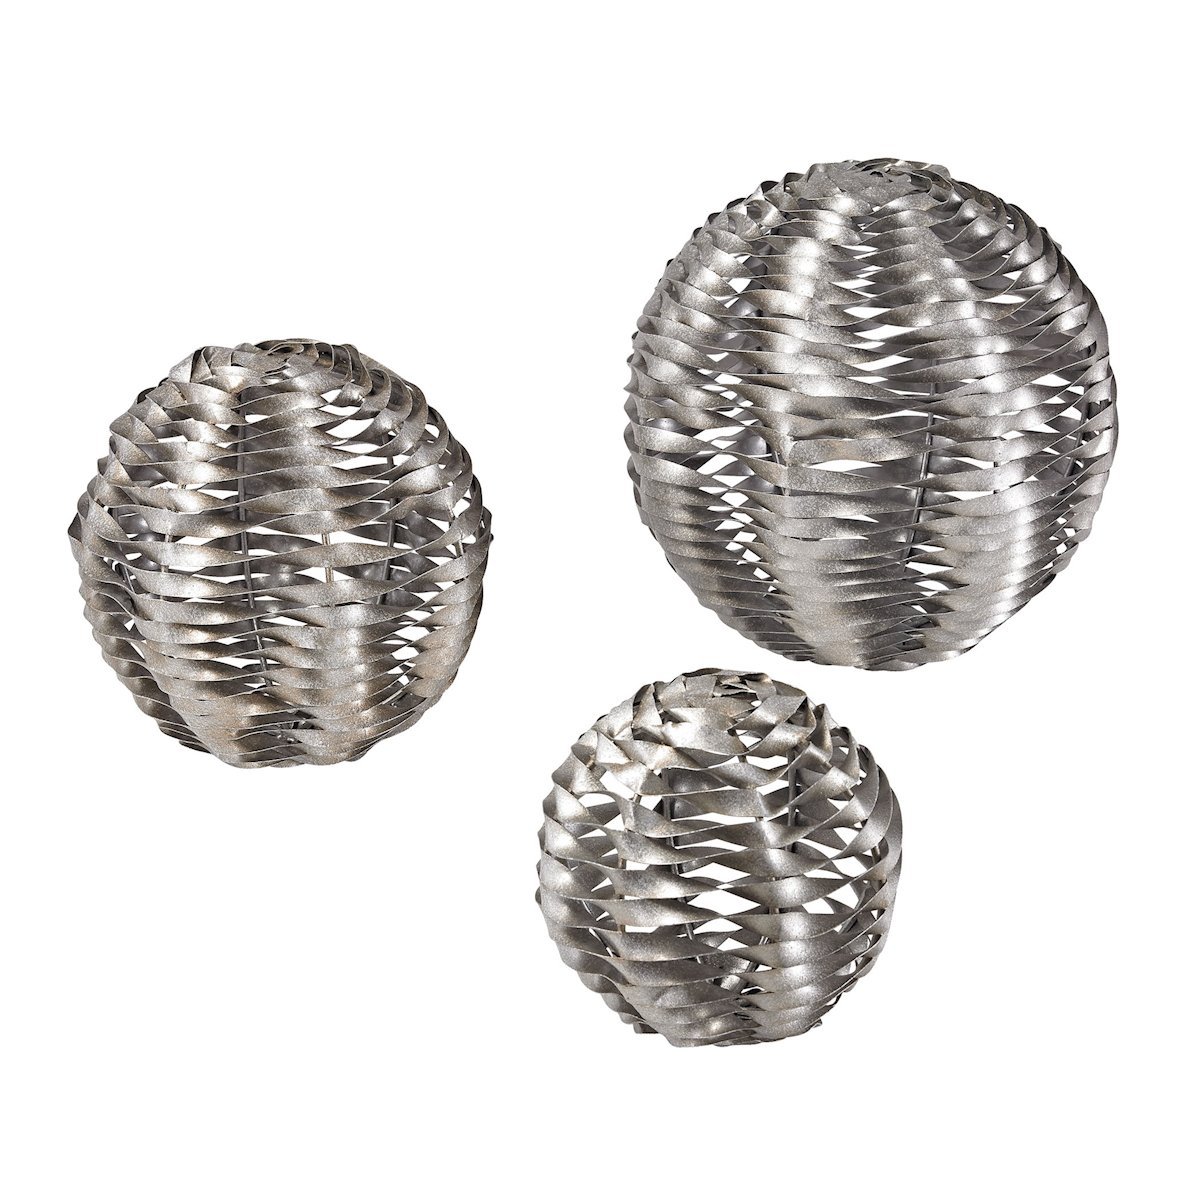 Metal Work Objects - Set of 3 ACCESSORIES Sterling 